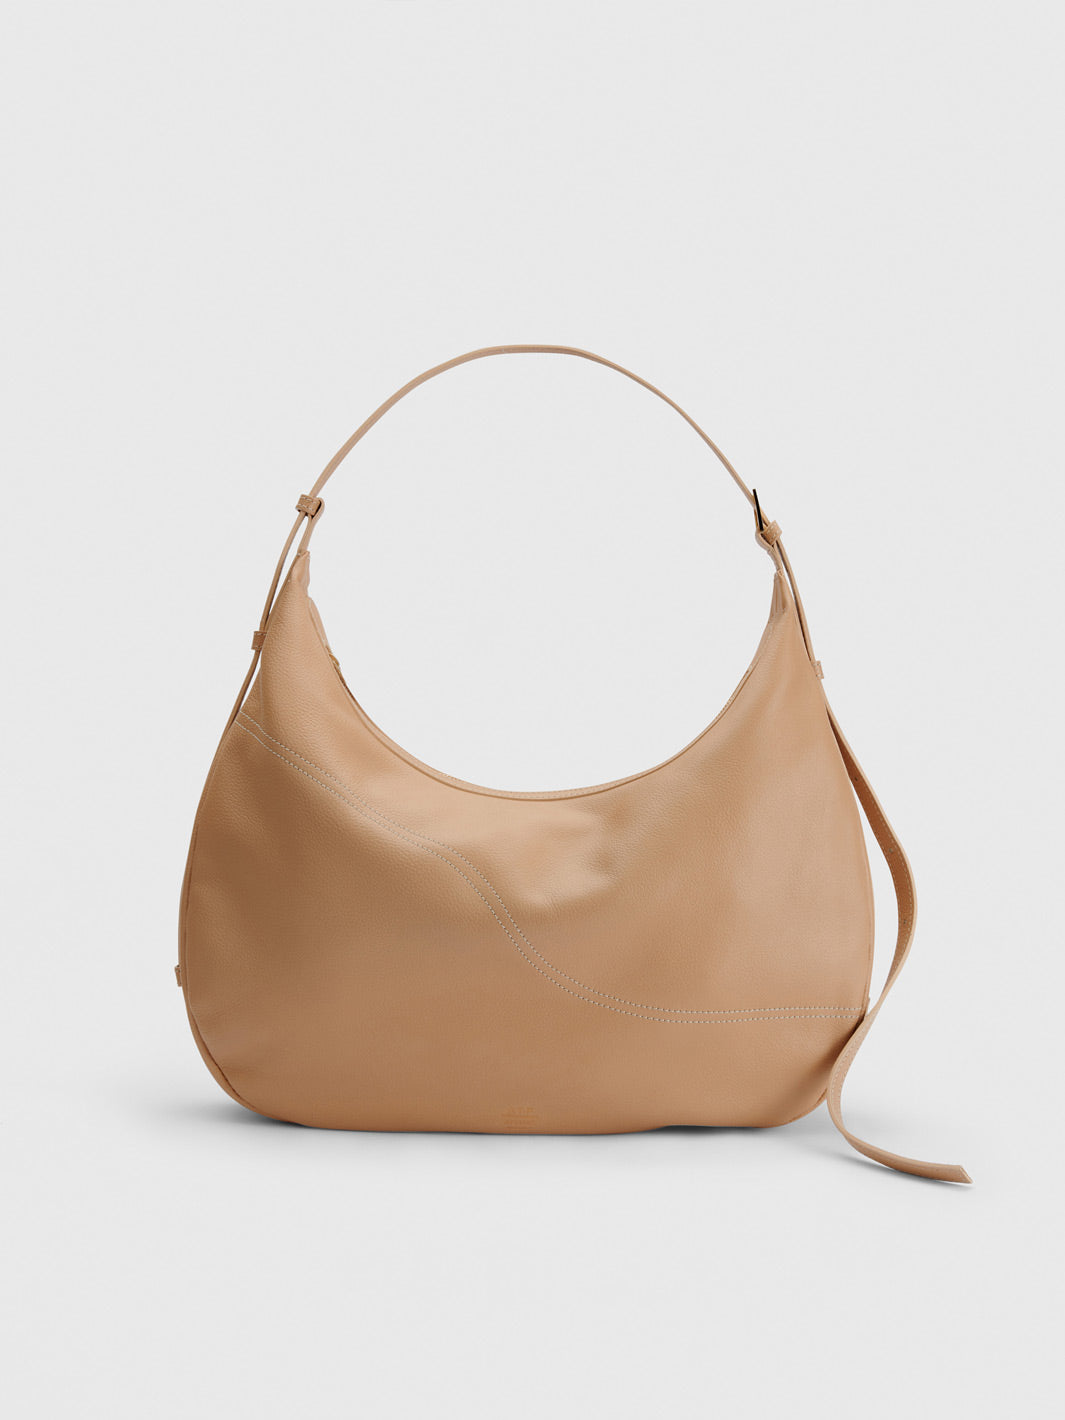 Potenza Nocciola/Contrast Stitch Grained Leather Large hobo bag